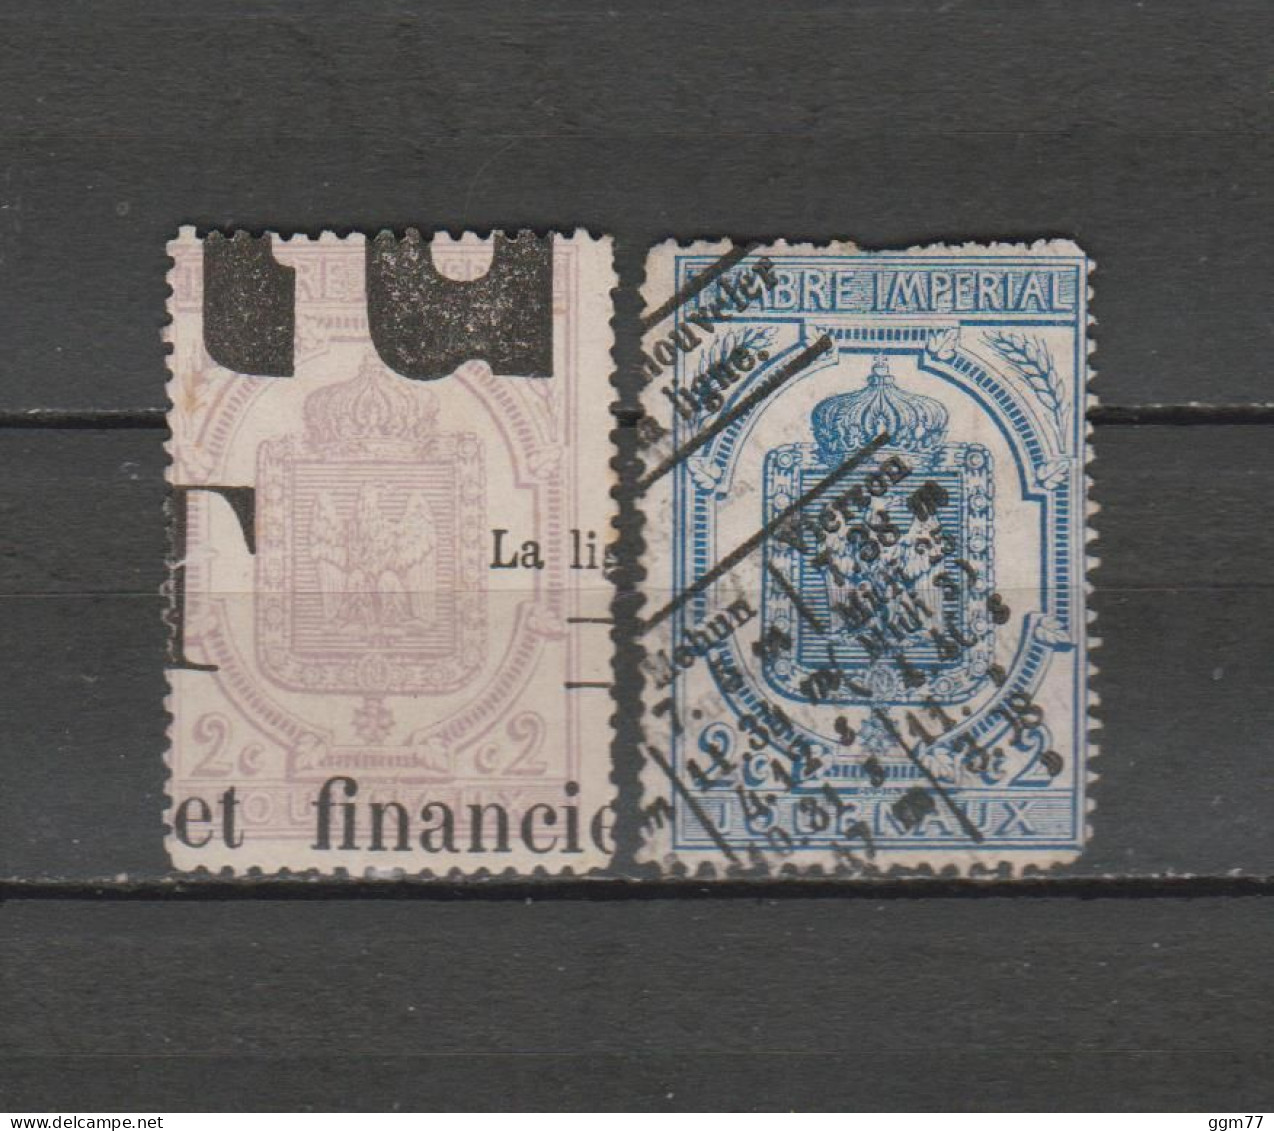 FRANCE 2 TIMBRES JOURNAUX N° 7 & 8 OBLITERES DE 1869   Cote : 65 € - Newspapers